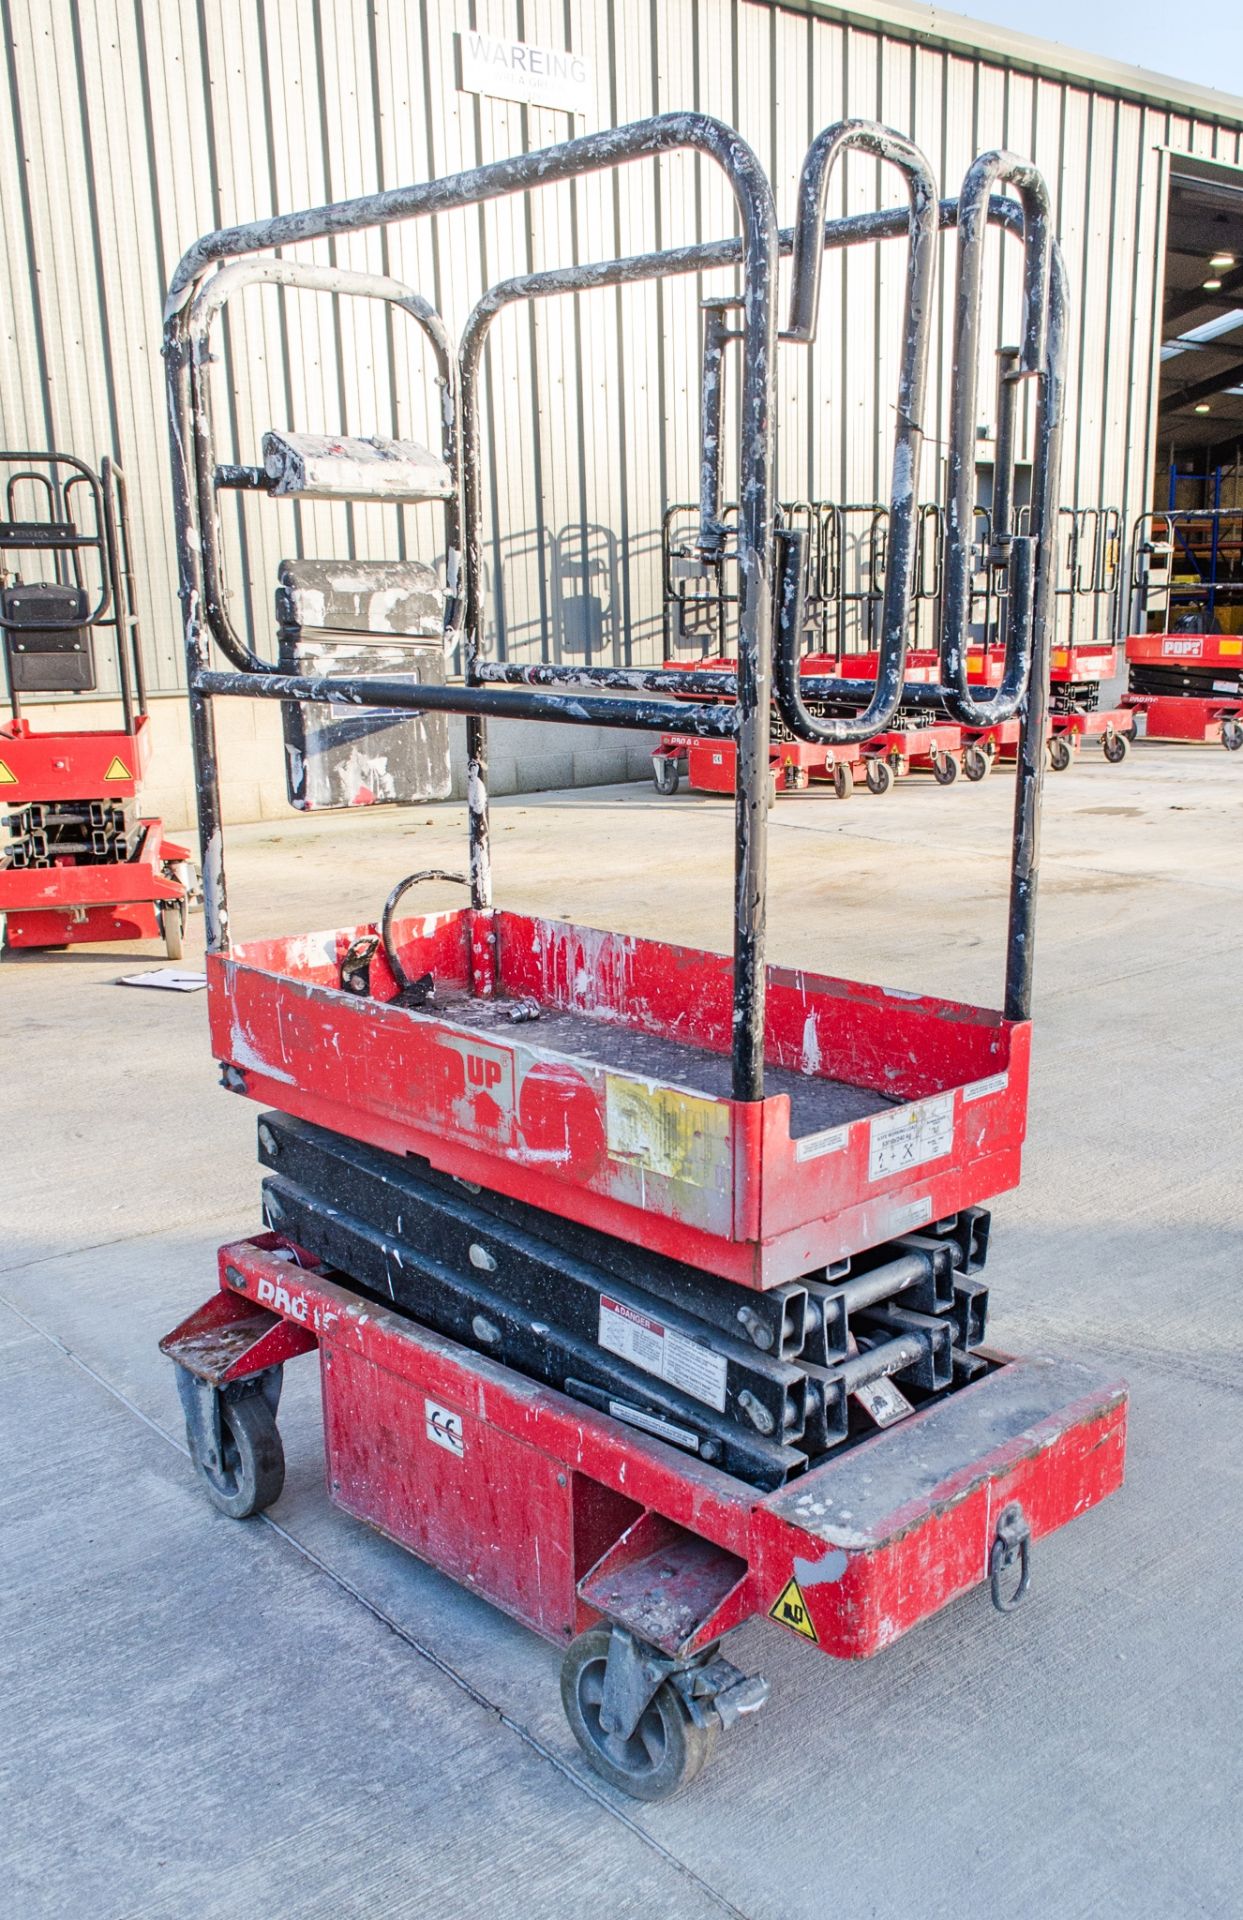 Pop Up Pro 10 battery electric push around scissor lift A740392 - Image 2 of 4